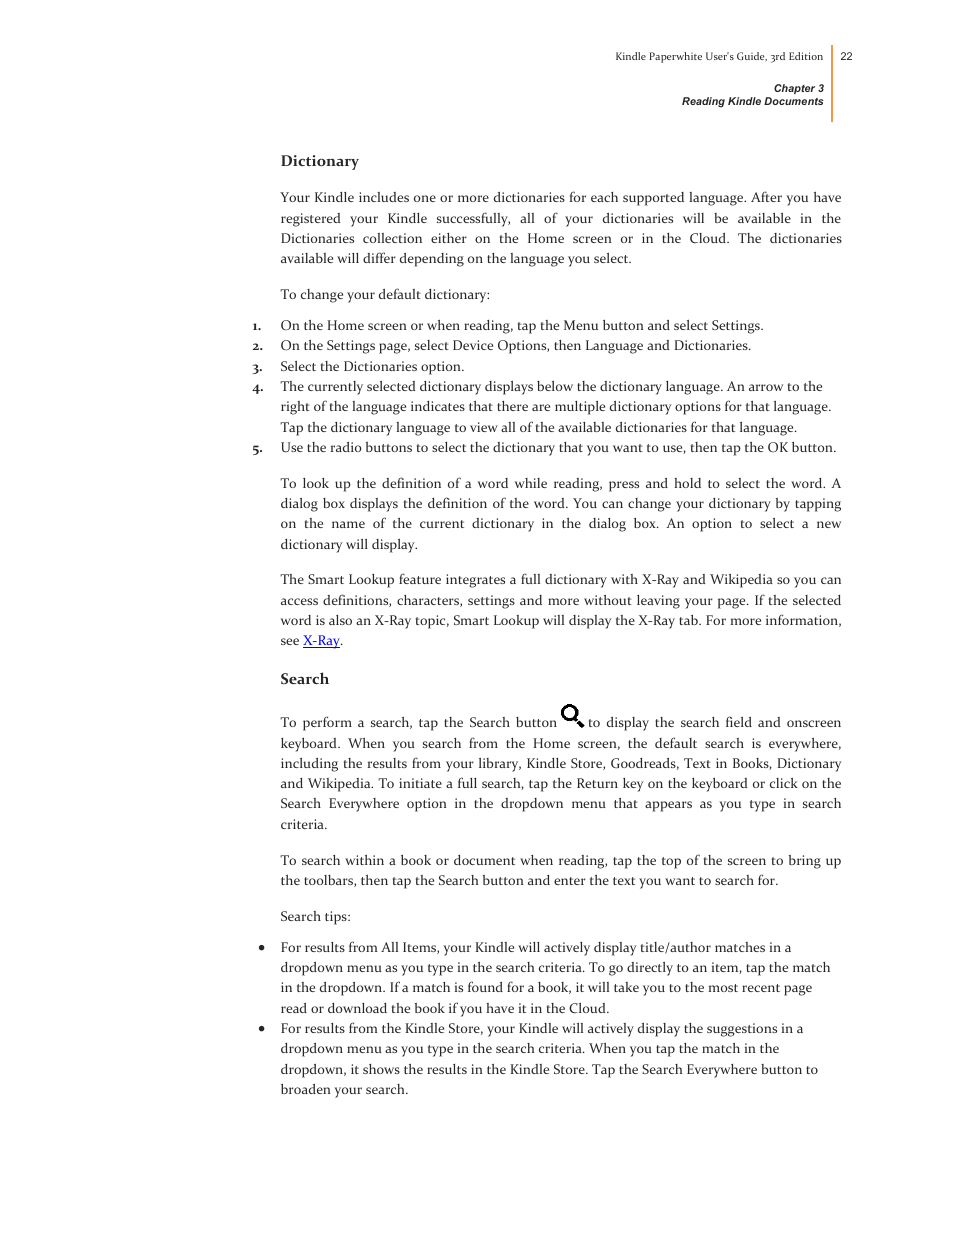 Dictionary, Search | Kindle Paperwhite (2nd Generation) User Manual | Page 22 / 47